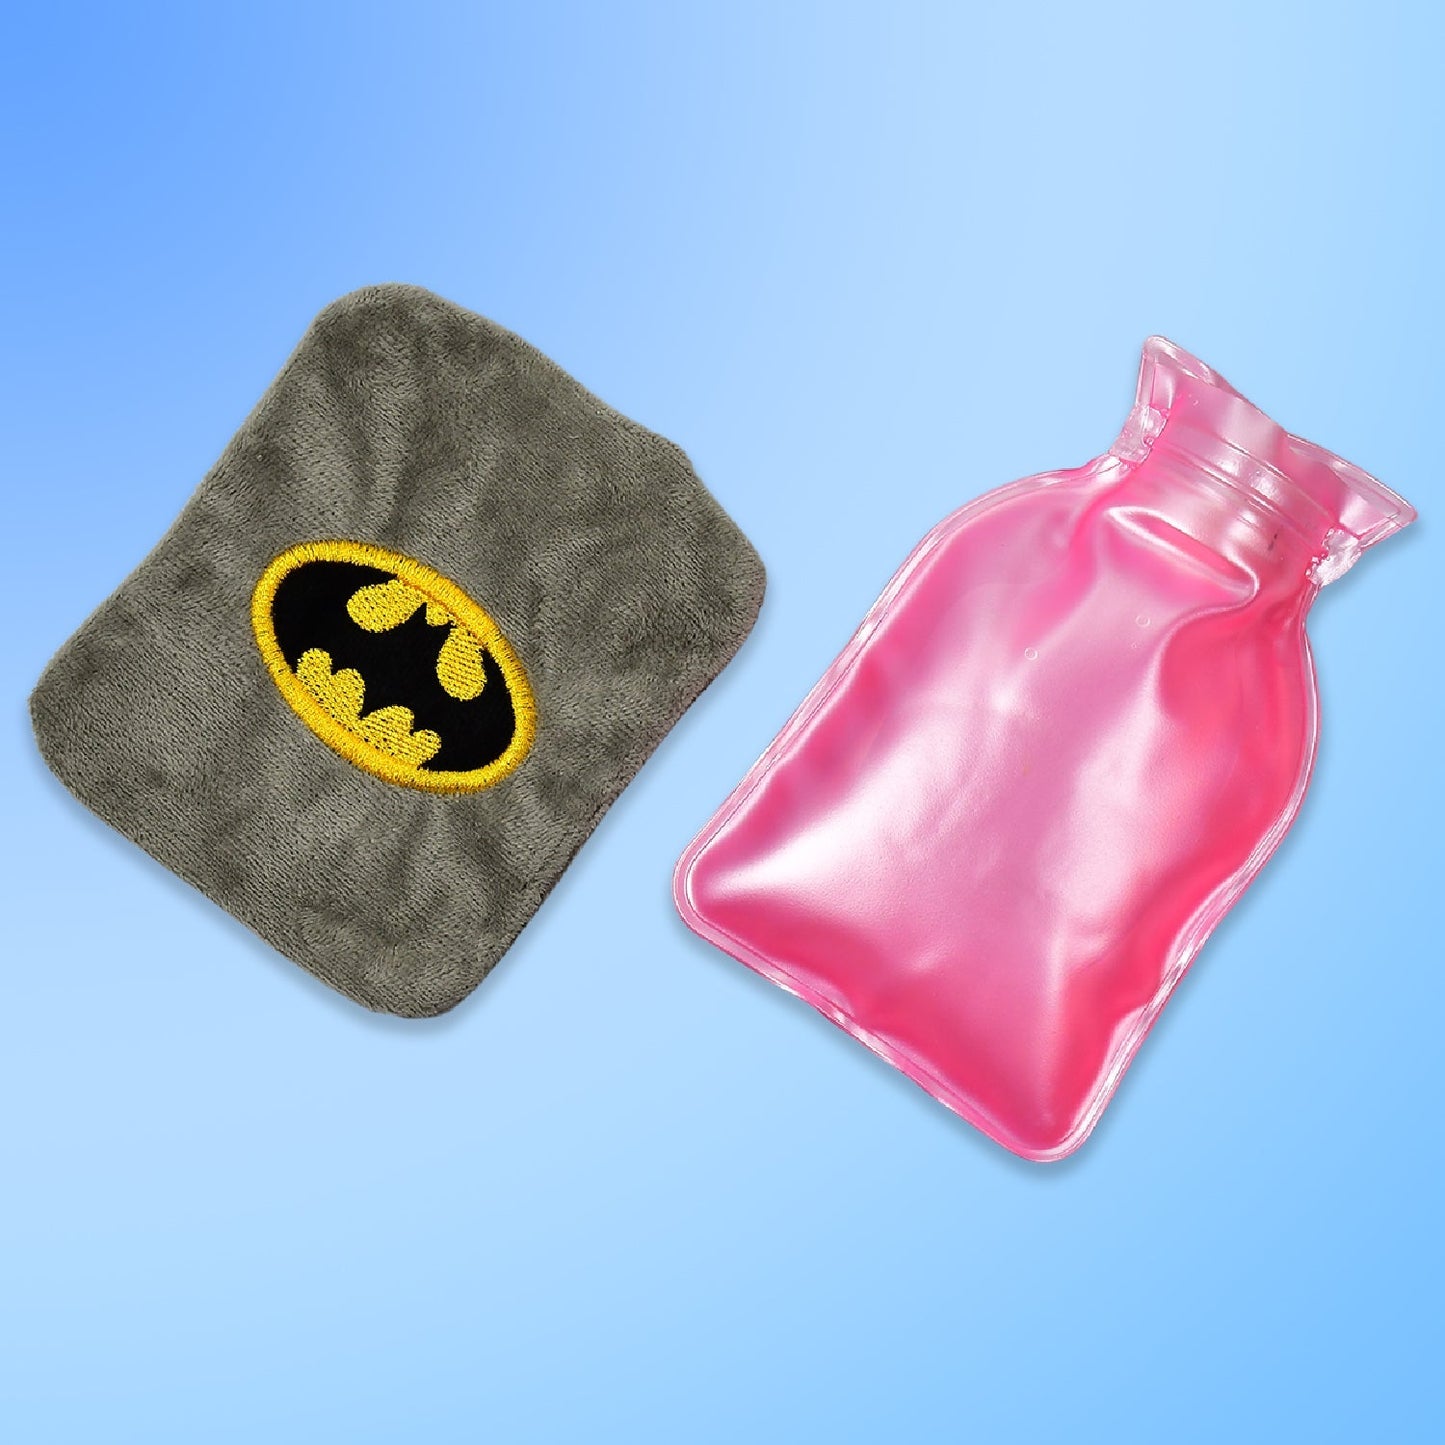 6505 Batman small Hot Water Bag with Cover for Pain Relief, Neck, Shoulder Pain and Hand, Feet Warmer, Menstrual Cramps. DeoDap